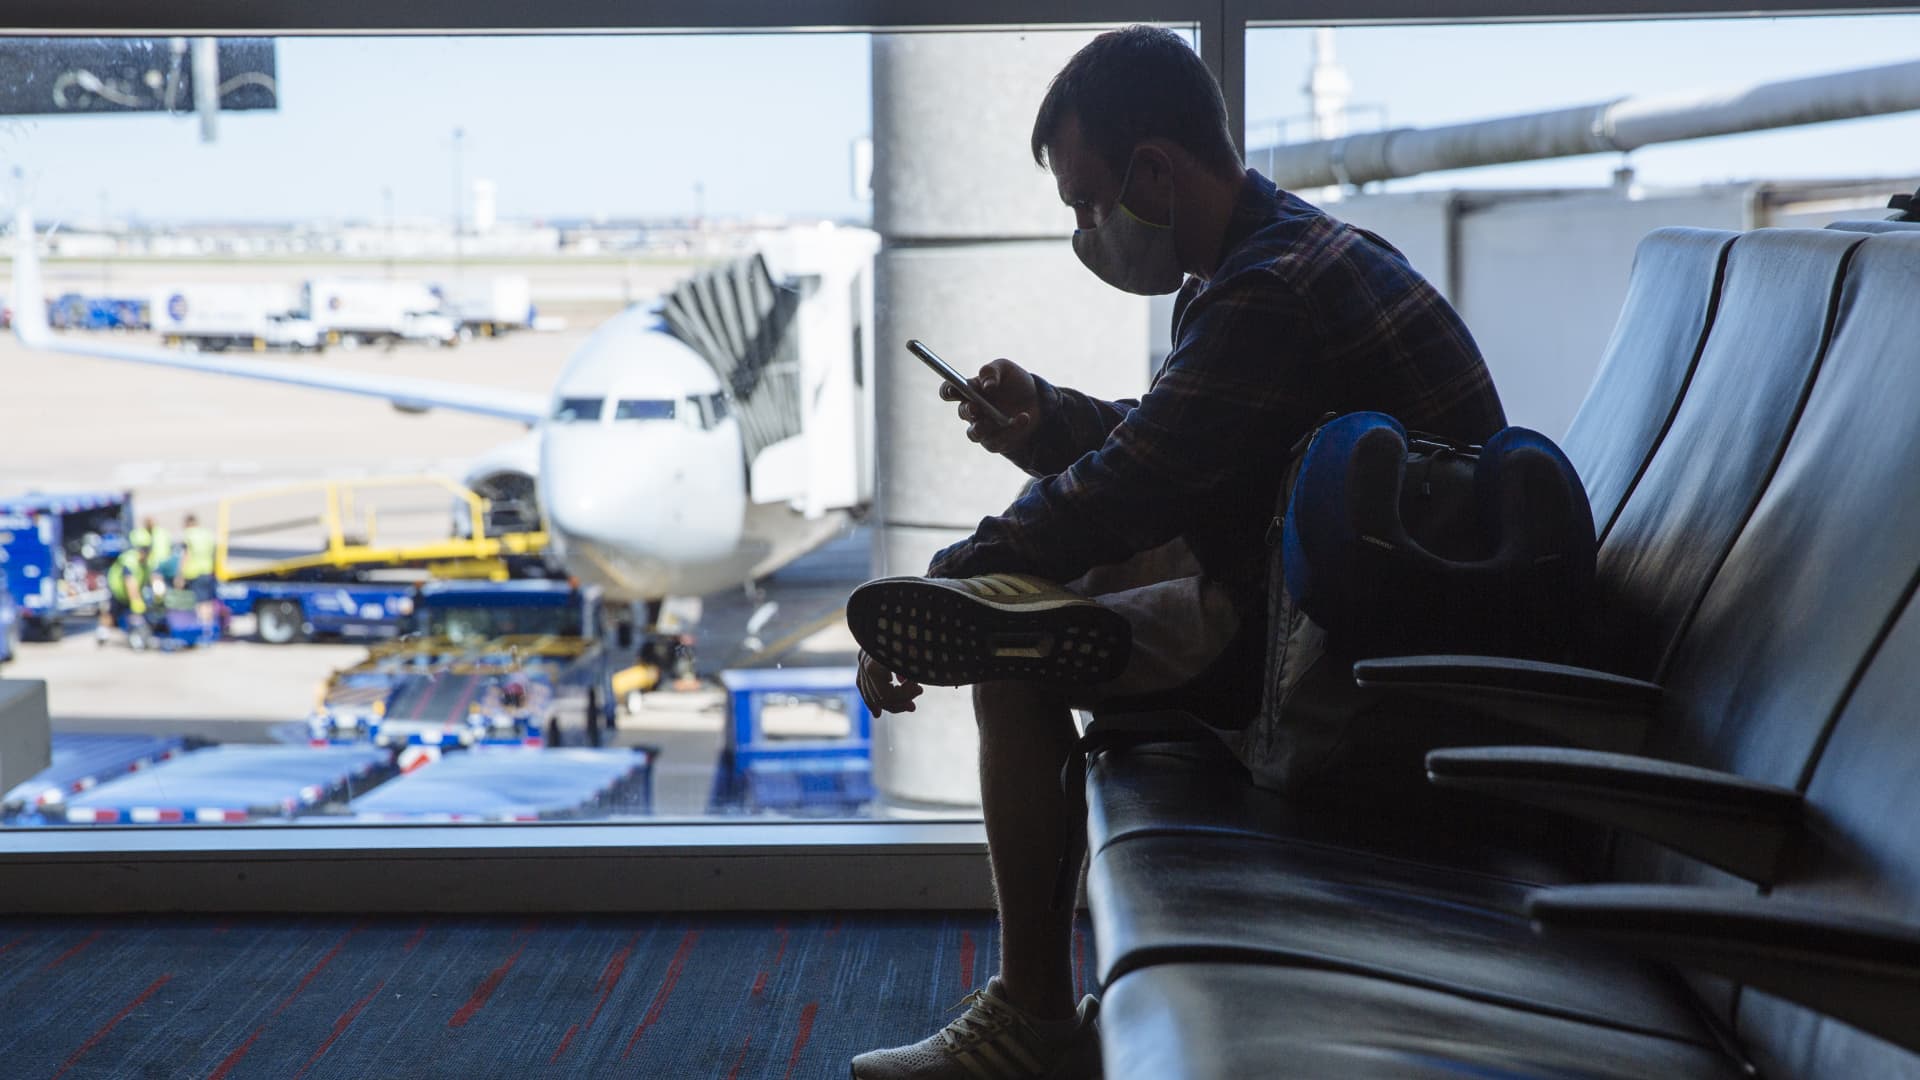 It’s a pain to fly these days. The FAA and airlines are trying to fix that